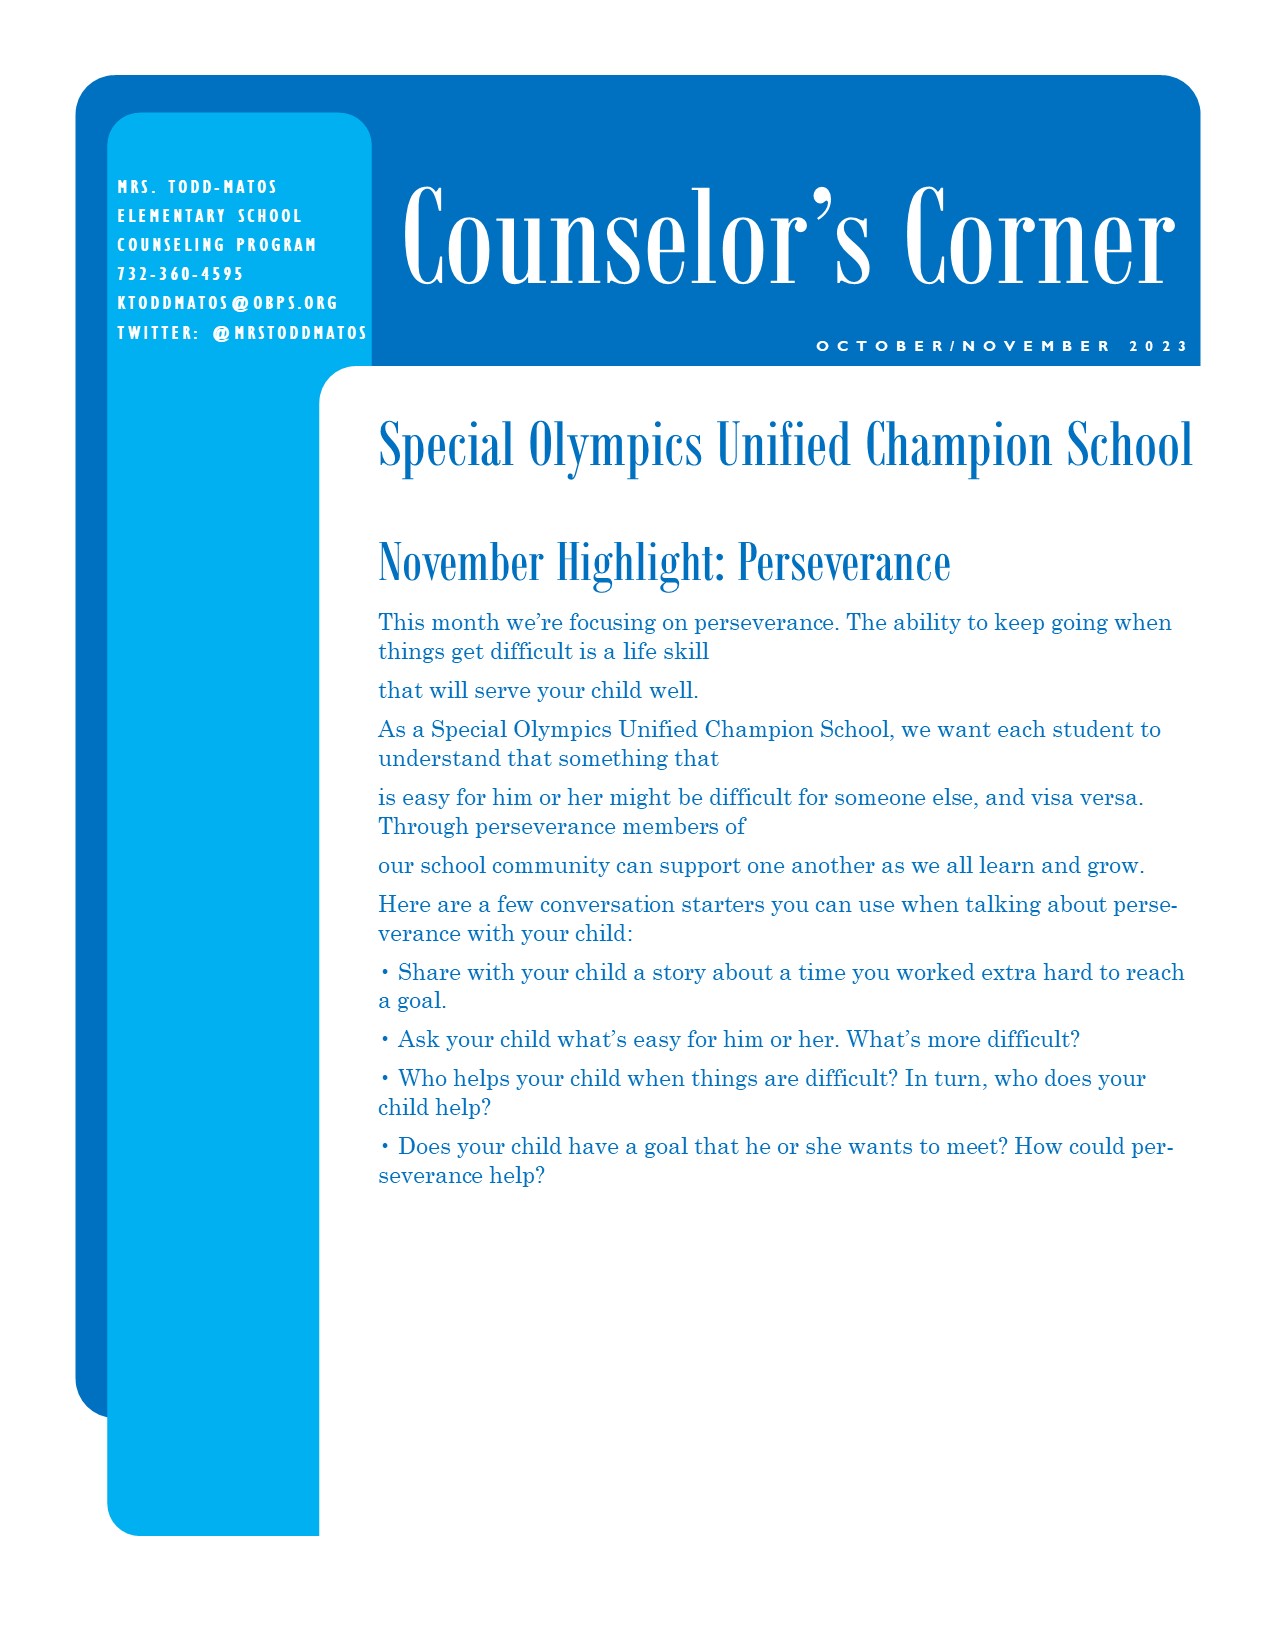 School Counselor October/November Newsletter Page 2